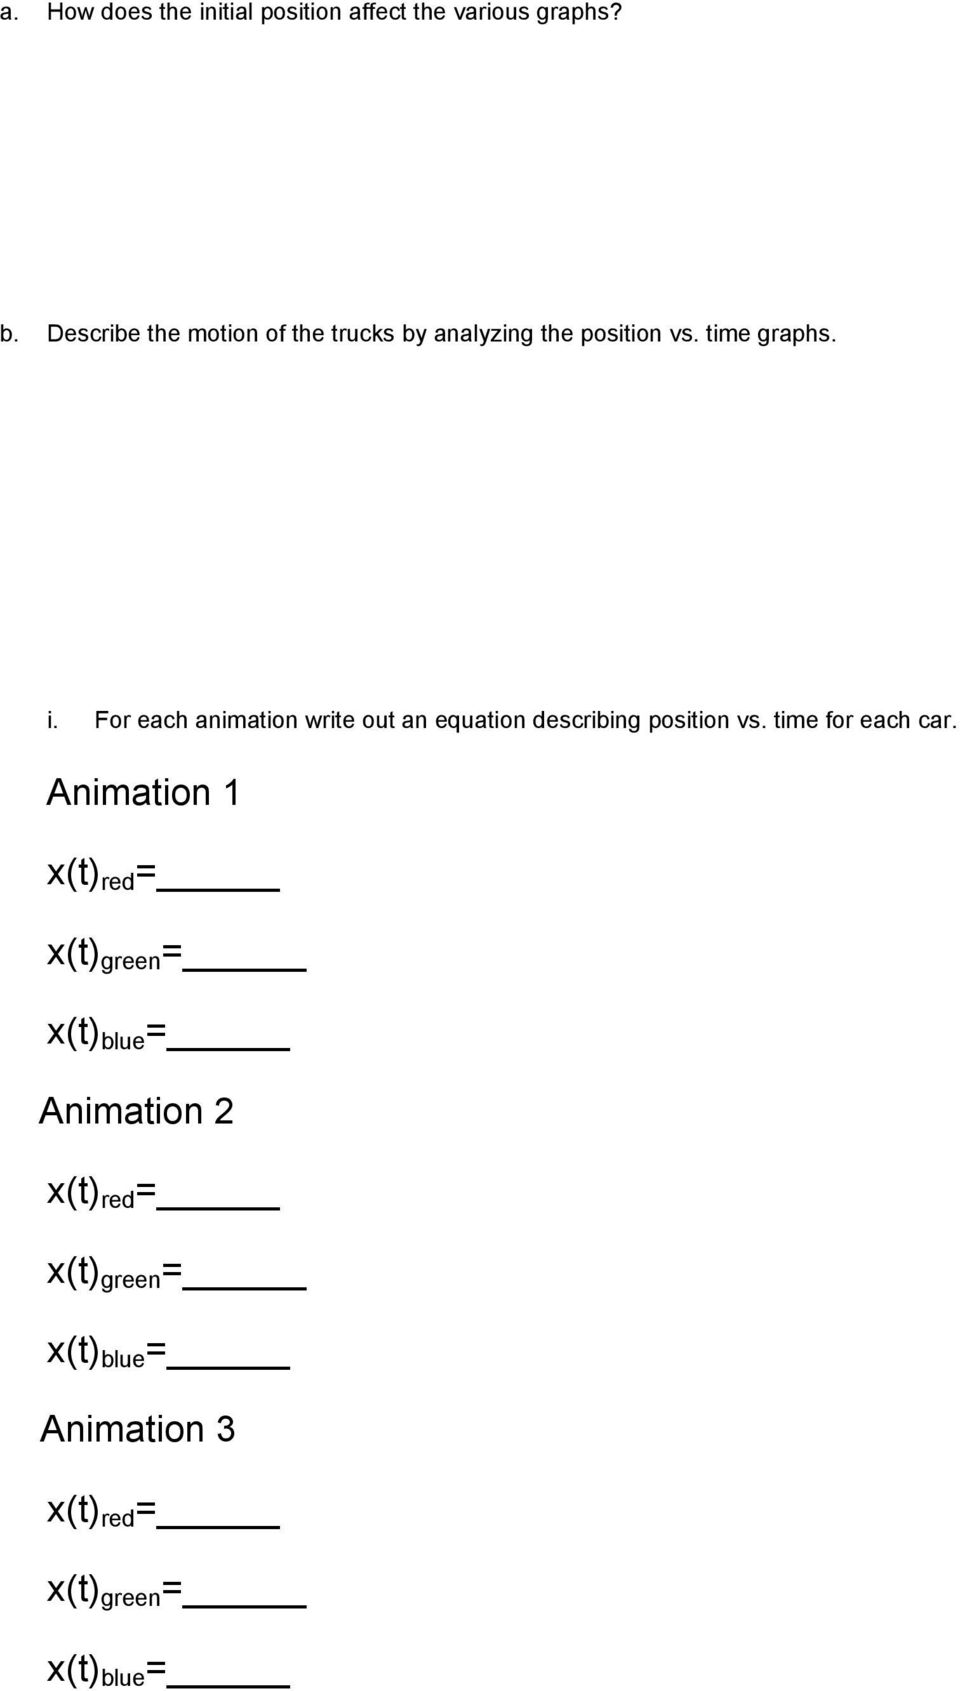 For each animation write out an equation describing position vs. time for each car.